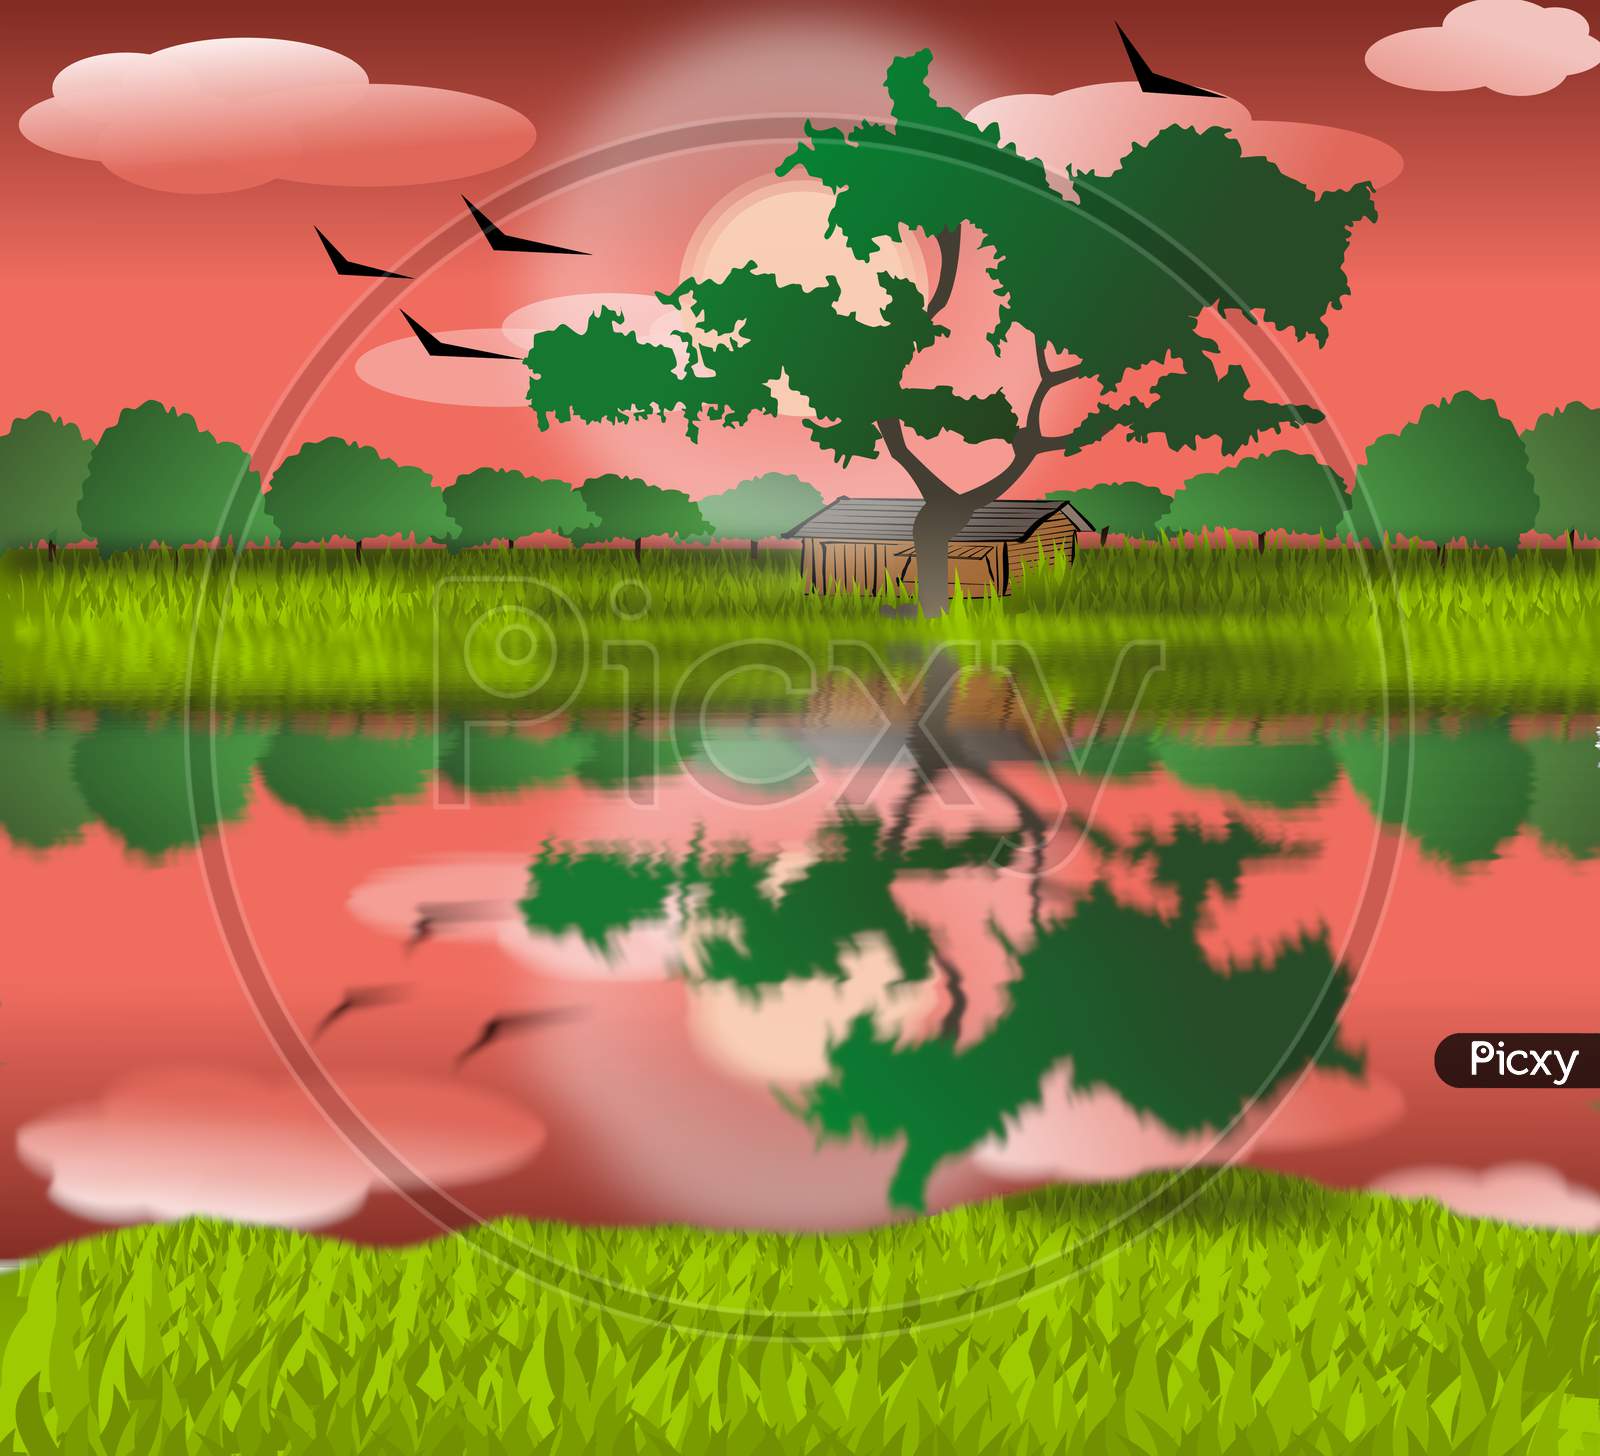 A beautiful evening view illustration graphic of the village with the red sky, bright sun, flying birds, farmlands, trees, meadows, hurt, clouds, and a lunar reflection on the water in the background.